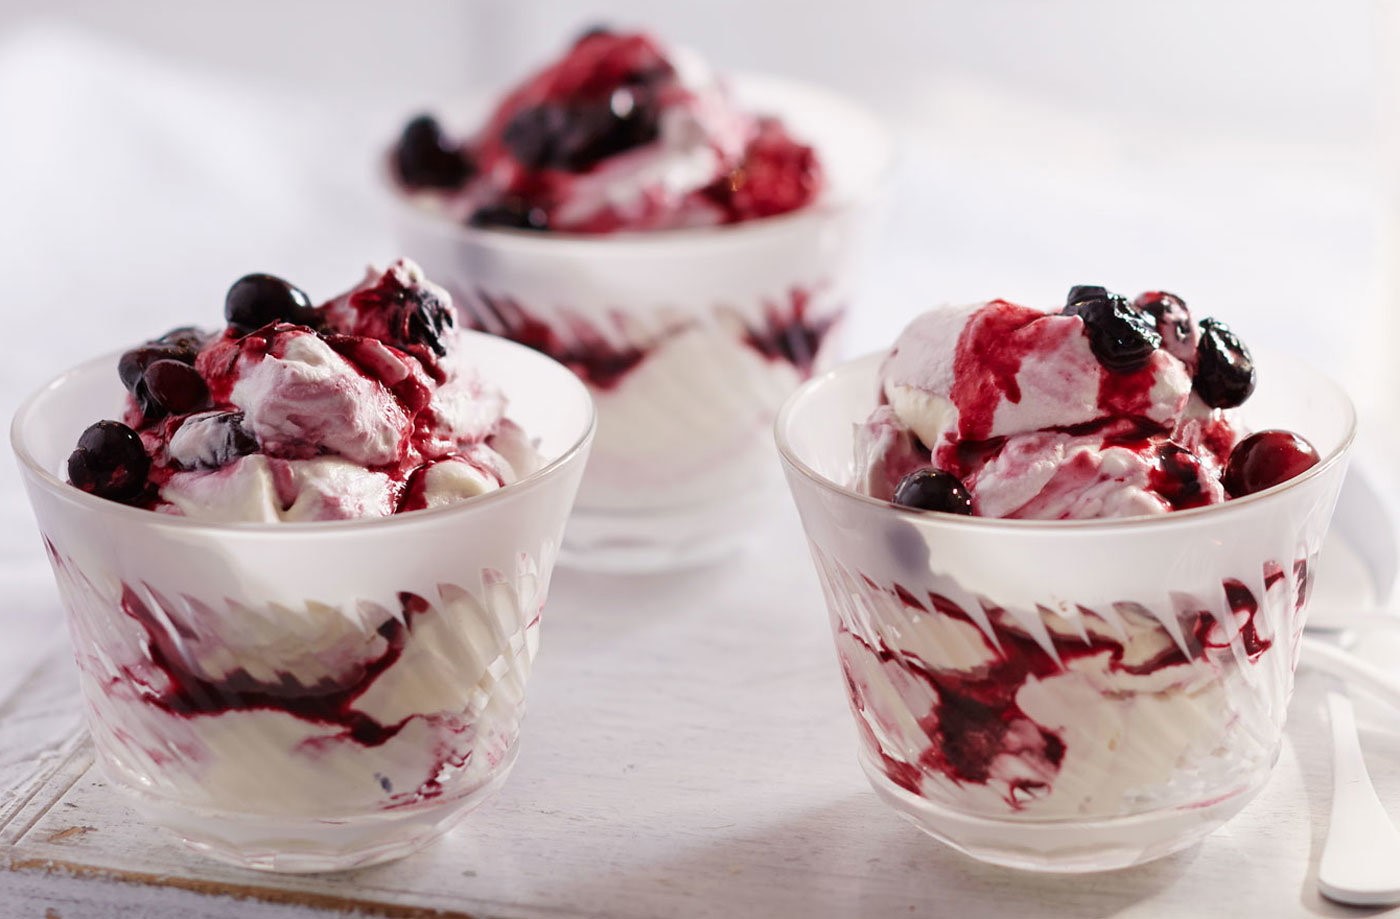 Summer Berry Fool Recipe – A Refreshing and Easy Dessert for the Season